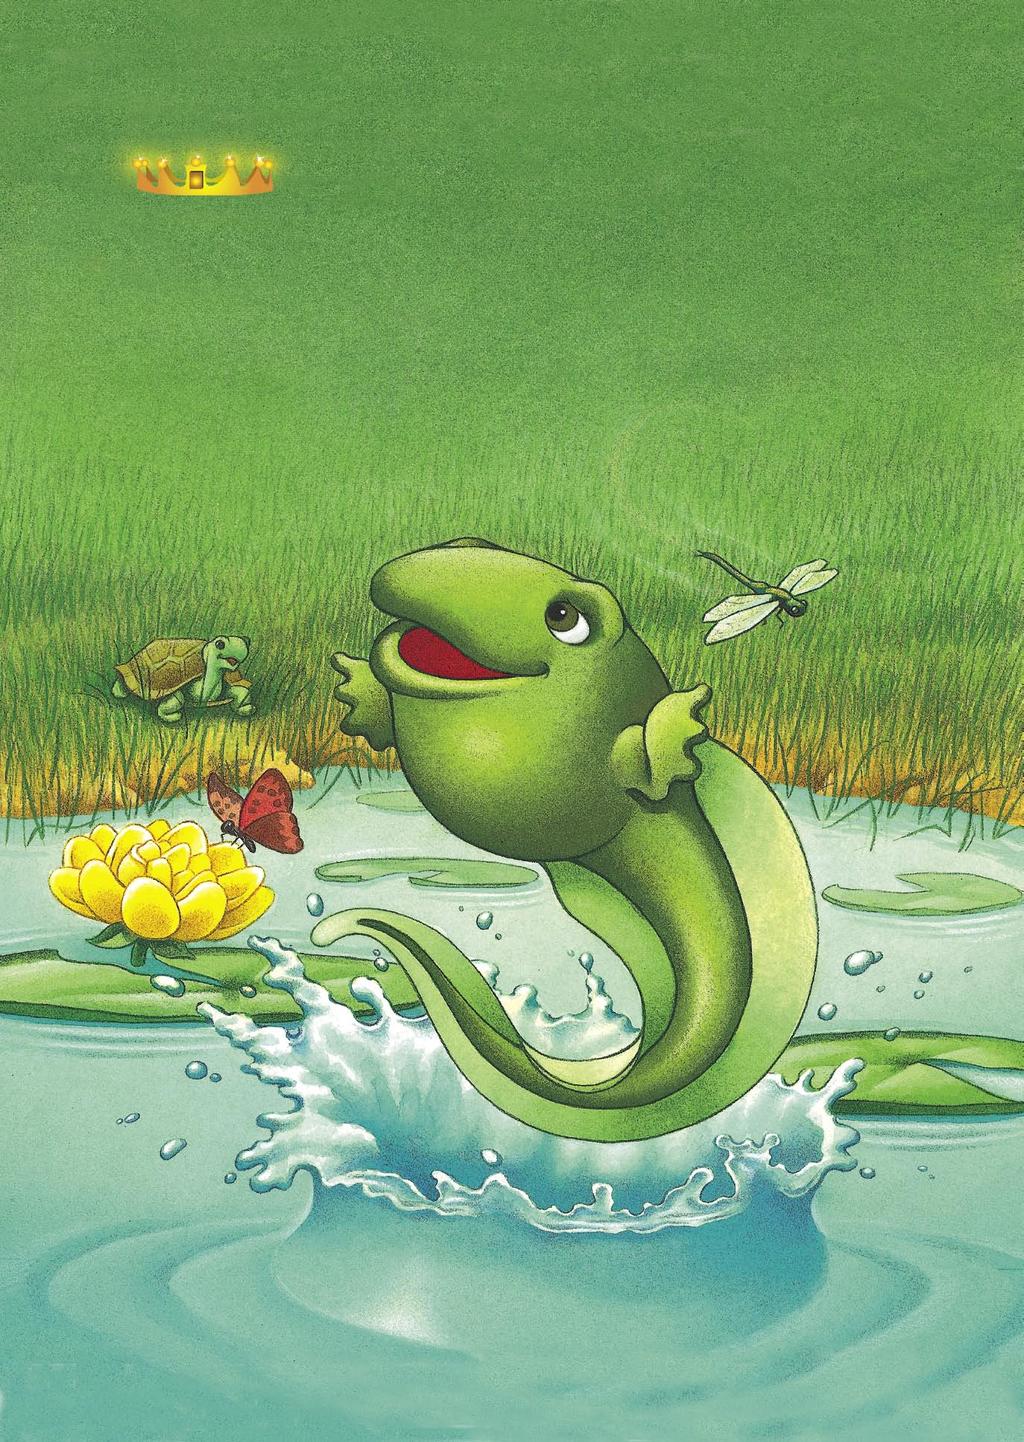 WIDTH 203MM+6MM FLAP 92MM $16.95 U.S. $25.95 Can. E 9MM Another Sommer-Time Story By Carl Sommer Illustrated by Greg Budwine T ombo the tadpole thinks he is the king of the pond.